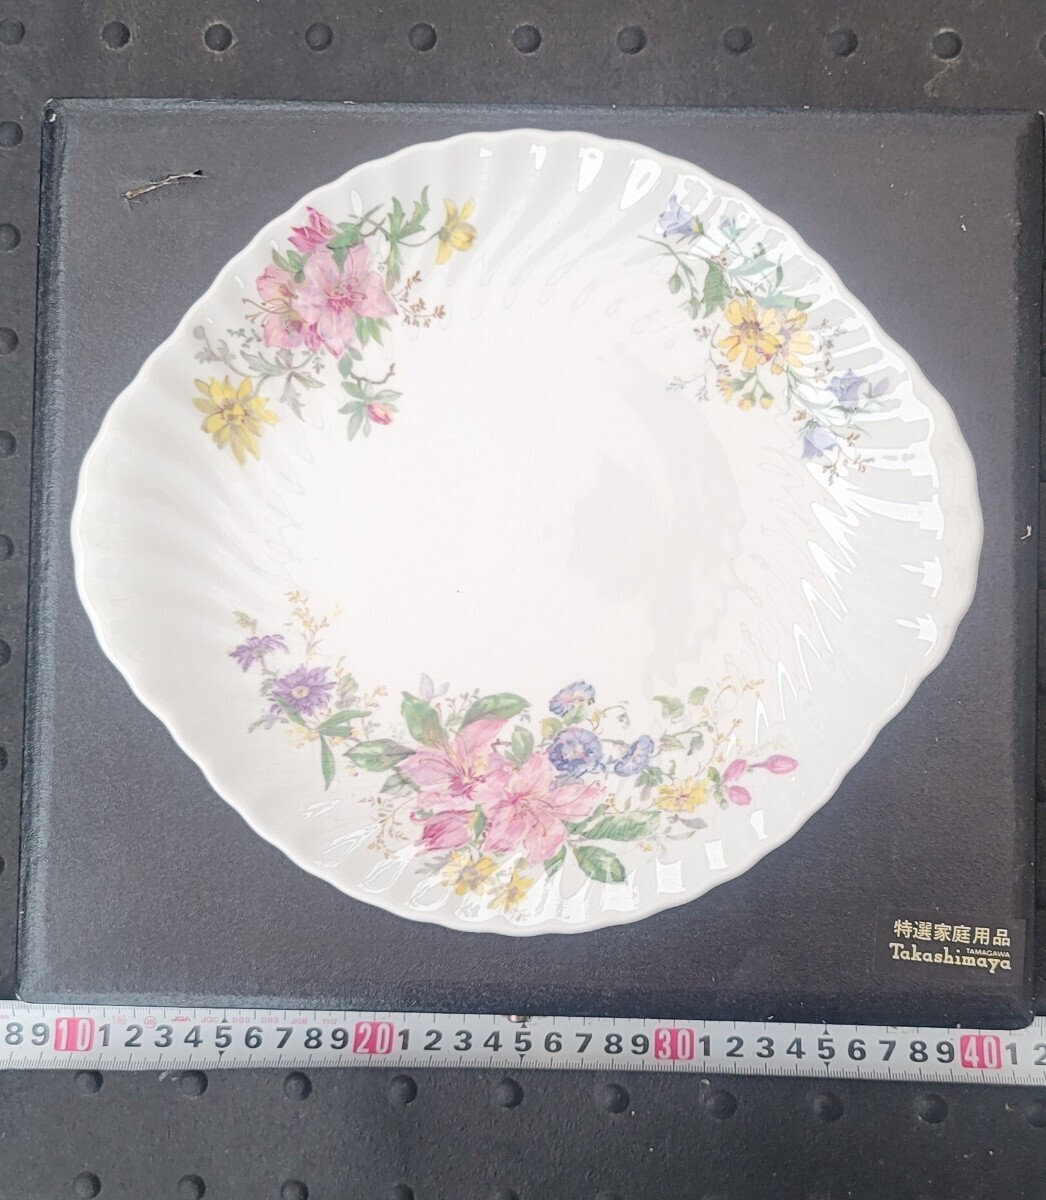  Royal Doulton 30cm ellipse plate ARCADIA ROYAL DOULTON Vintage England height island shop that time thing storage goods England made box equipped a LUKA tia